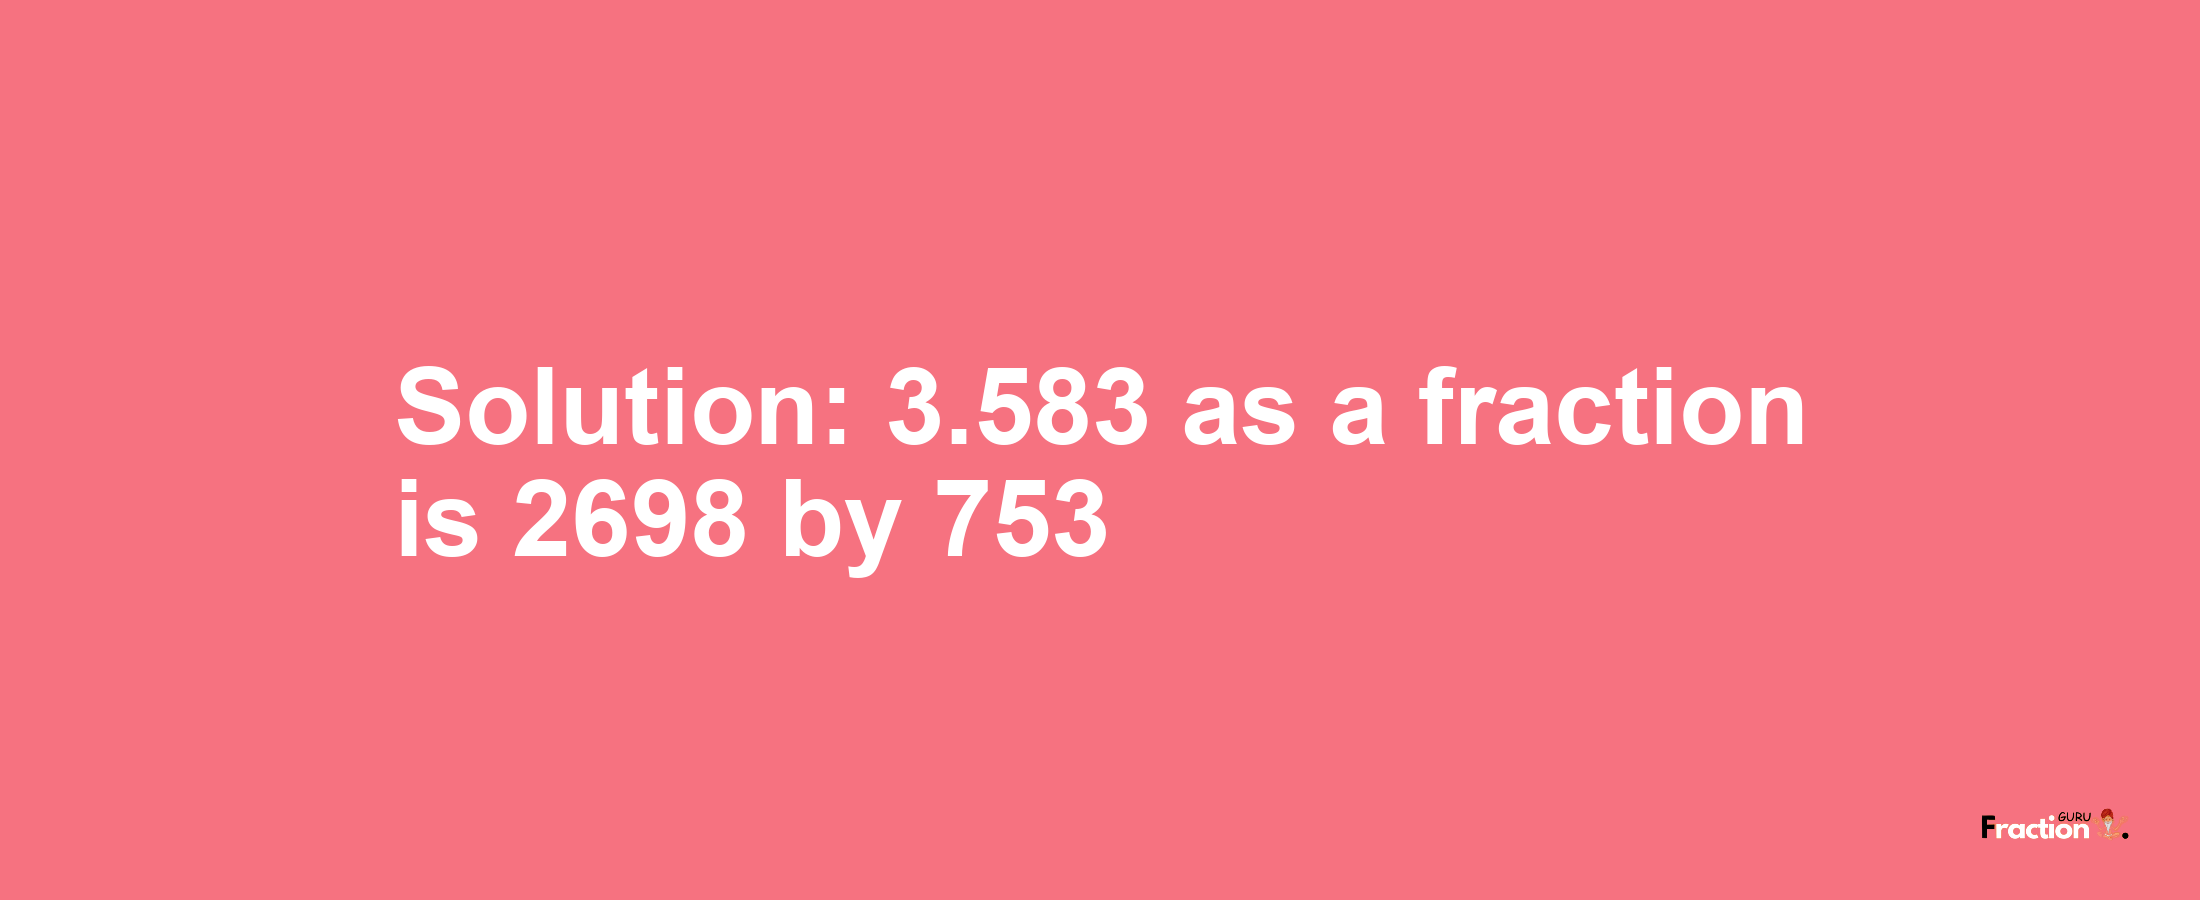 Solution:3.583 as a fraction is 2698/753